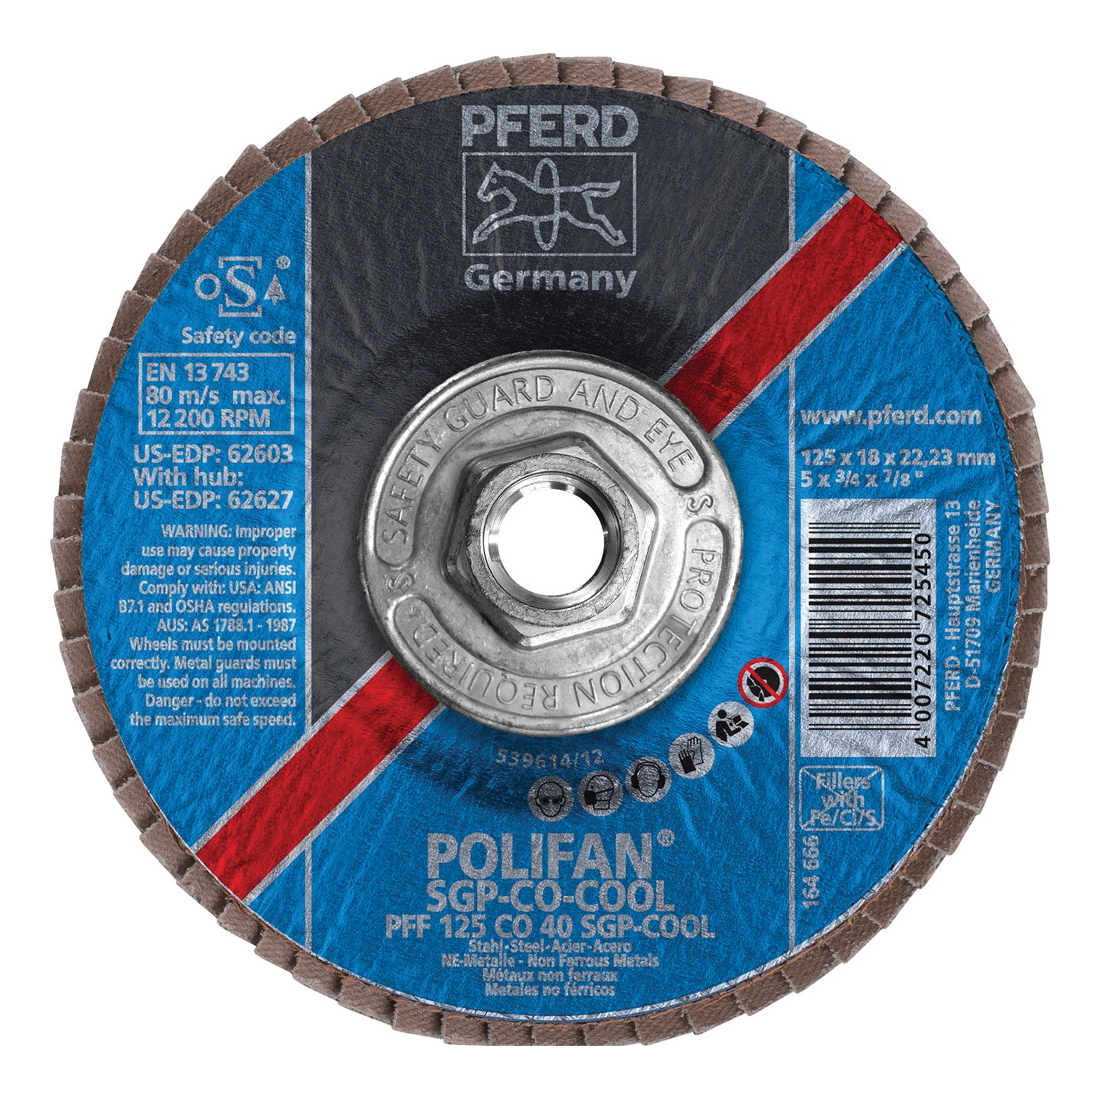 PFERD Polifan® 62627 Special Line SGP CO-COOL Threaded Coated Abrasive Flap Disc, 5 in Dia, 40 Grit, Ceramic Oxide Abrasive, Type 27 Flat Disc